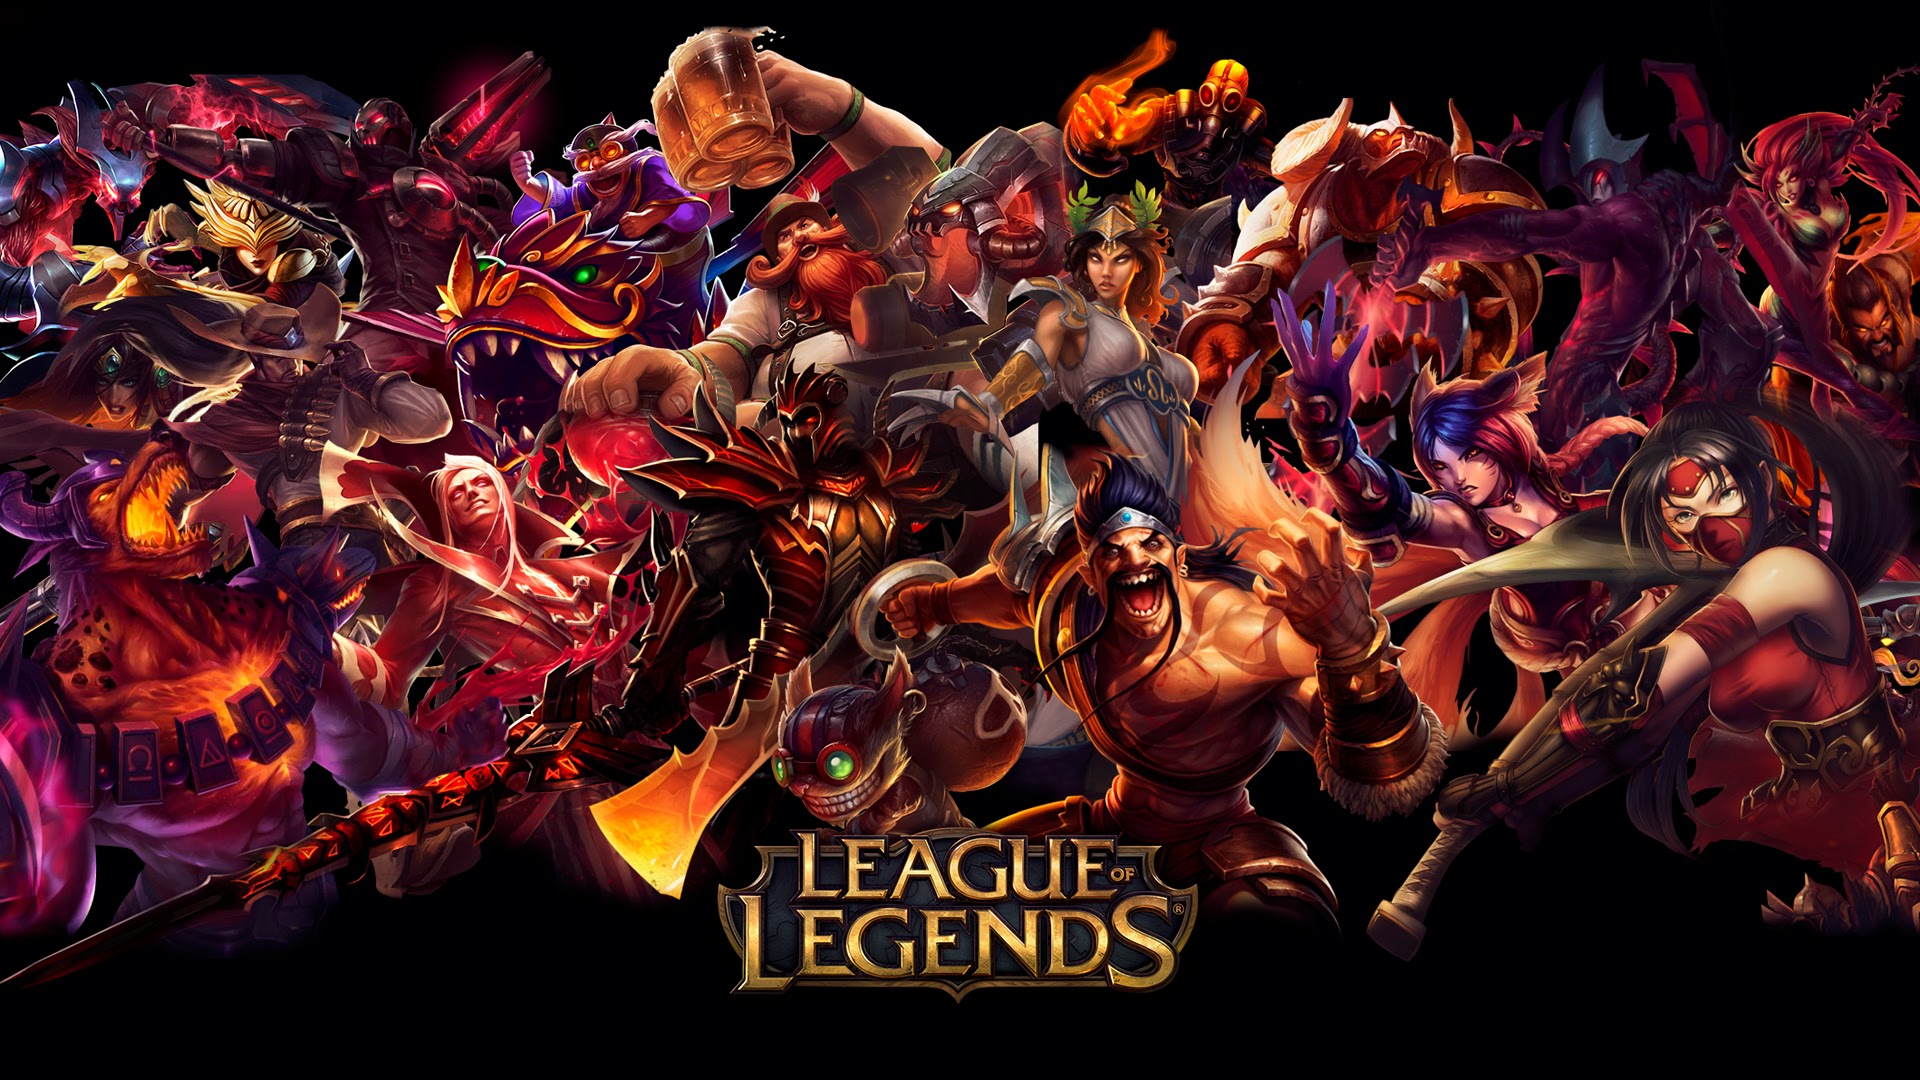 Free download league of legends red hd wallpaper background lol champion x x for your desktop mobile tablet explore league of legends backgrounds league of legends wallpapers league